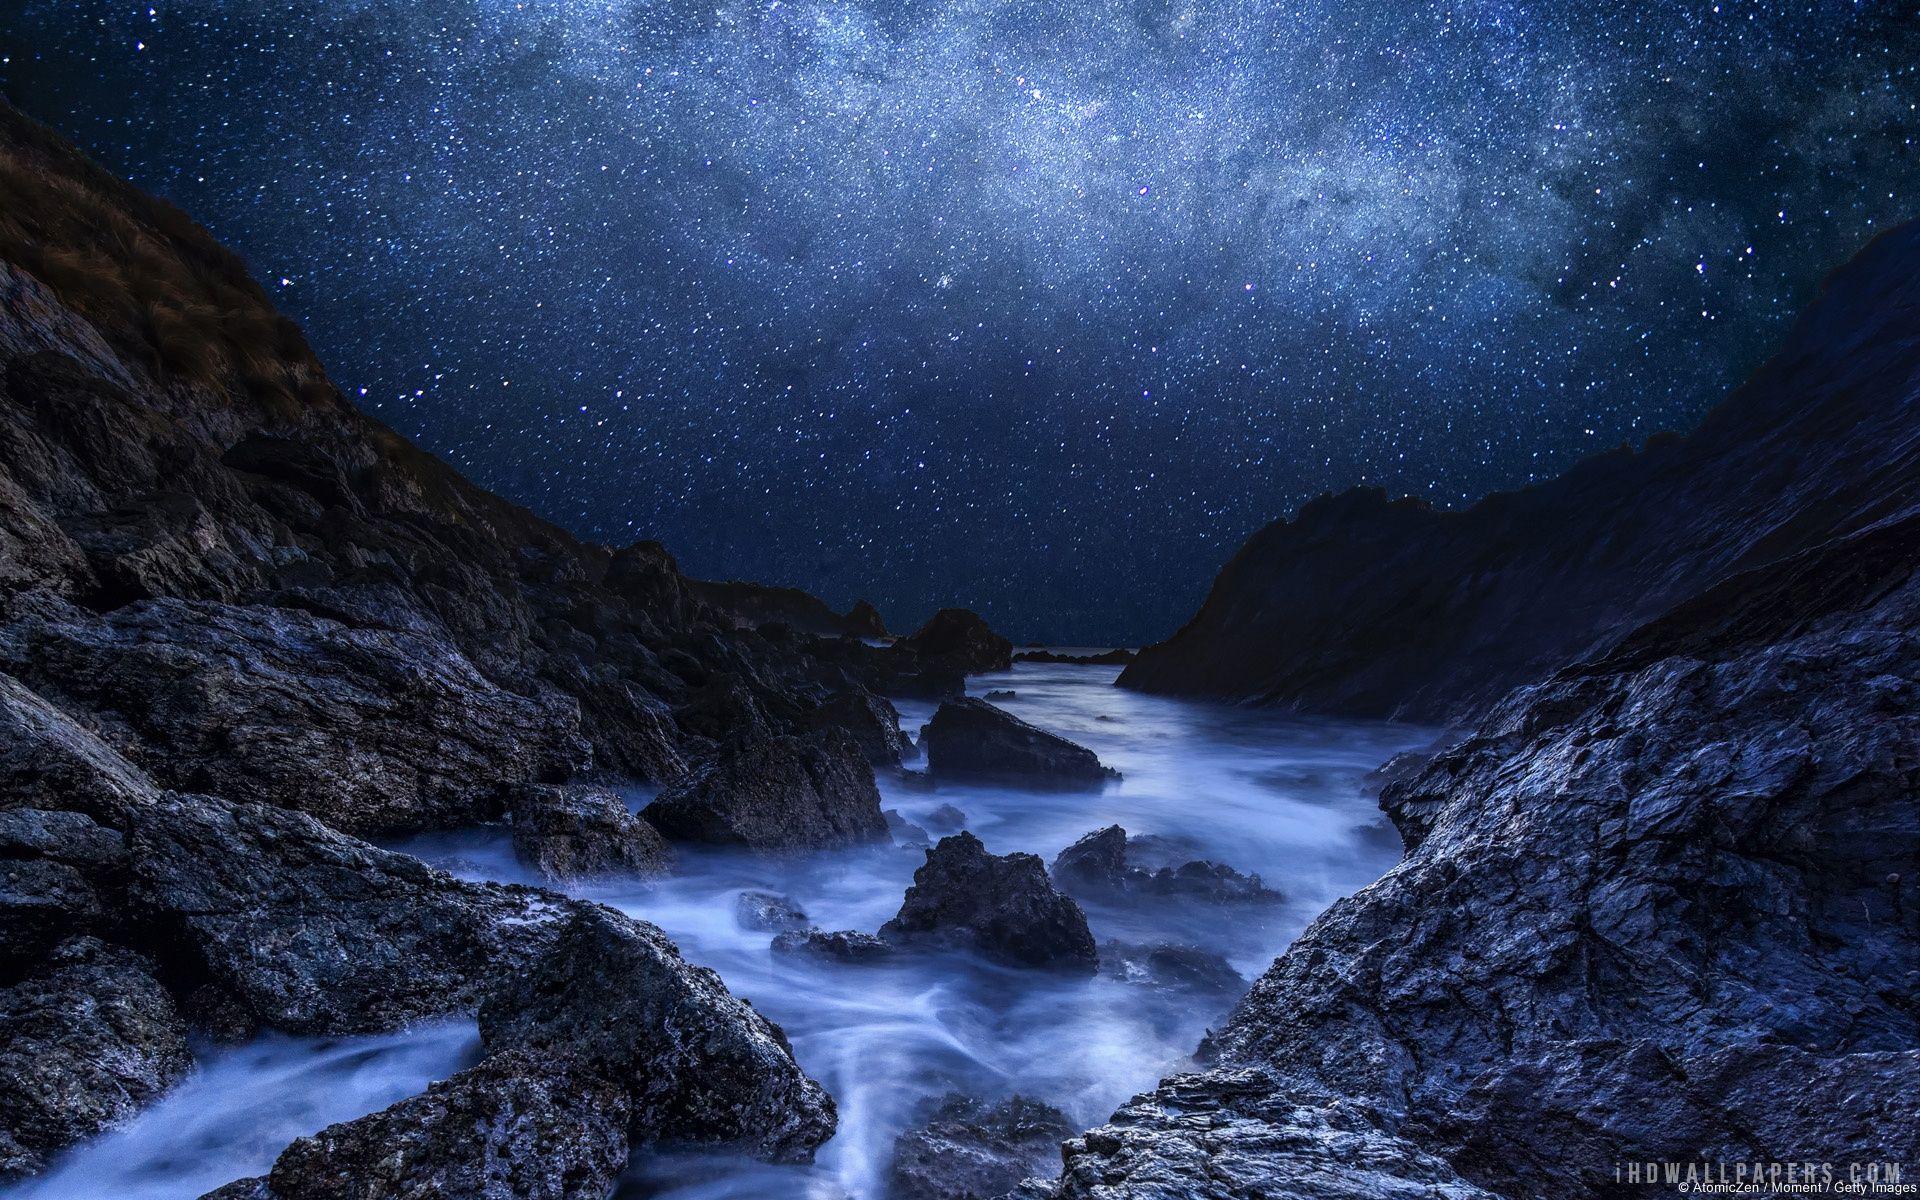 Cyan Starry Night wallpaper. nature and landscape